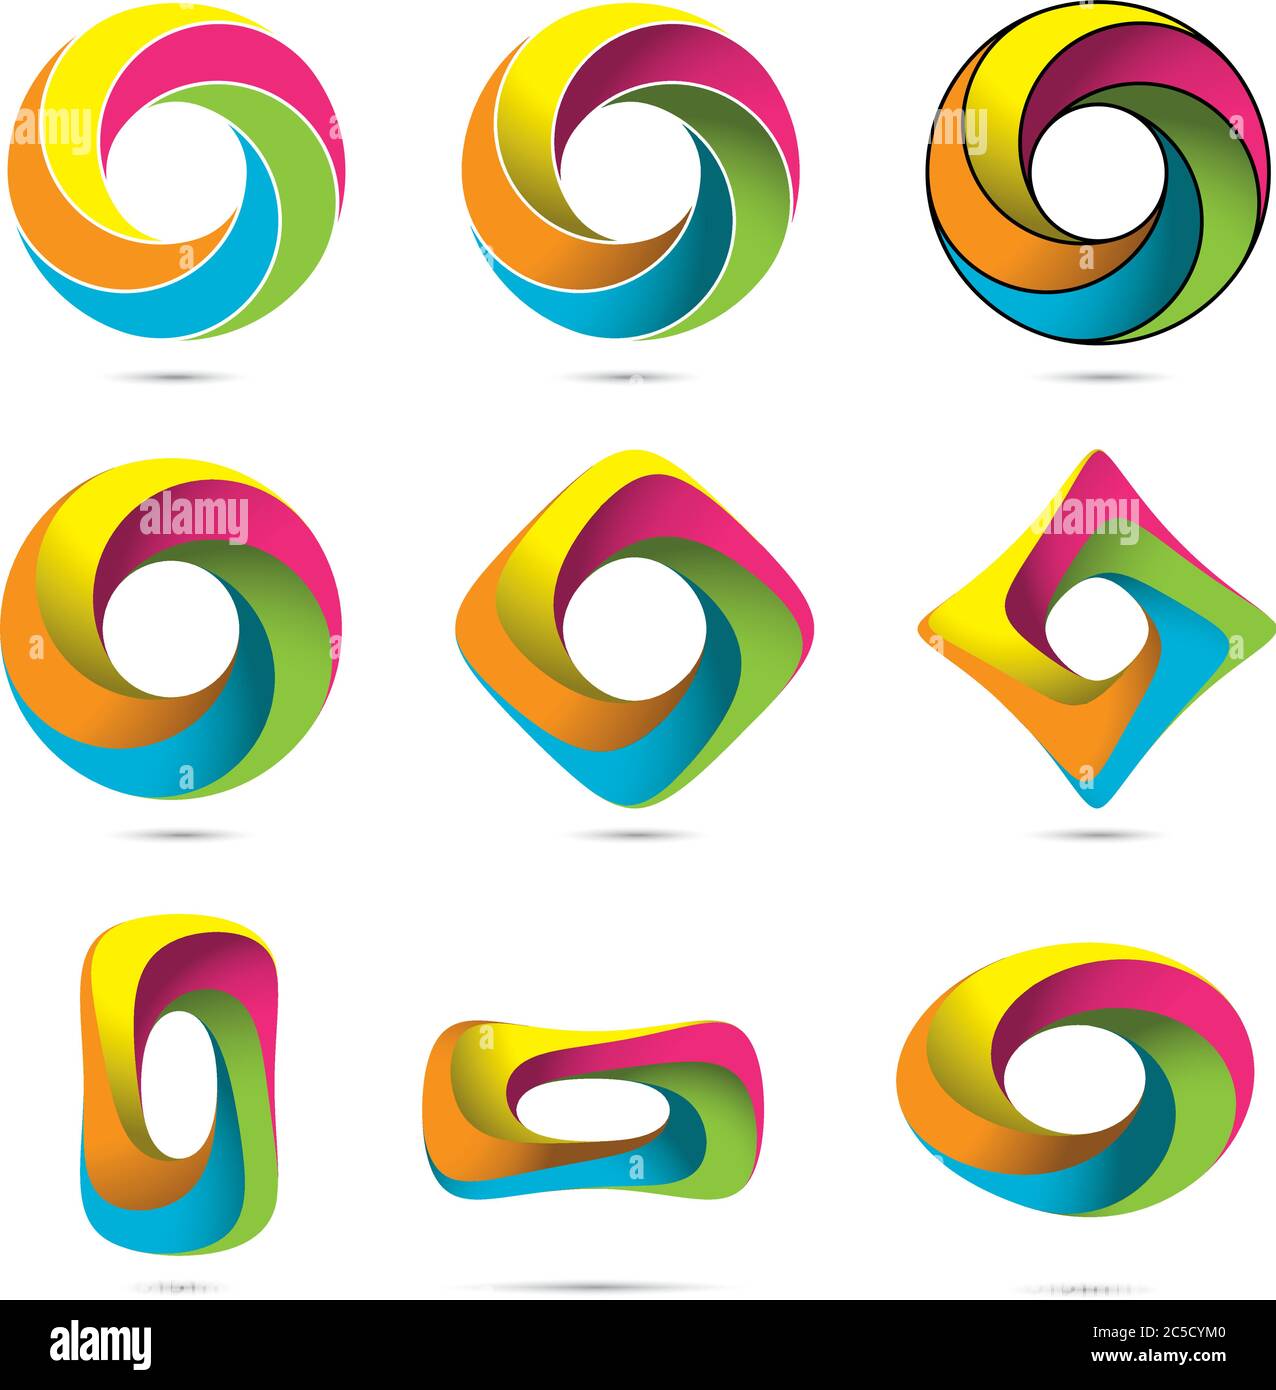 Impossible Infinite Loop Vector Design Elements Collection. Easily editable with global color swatches. Stock Vector